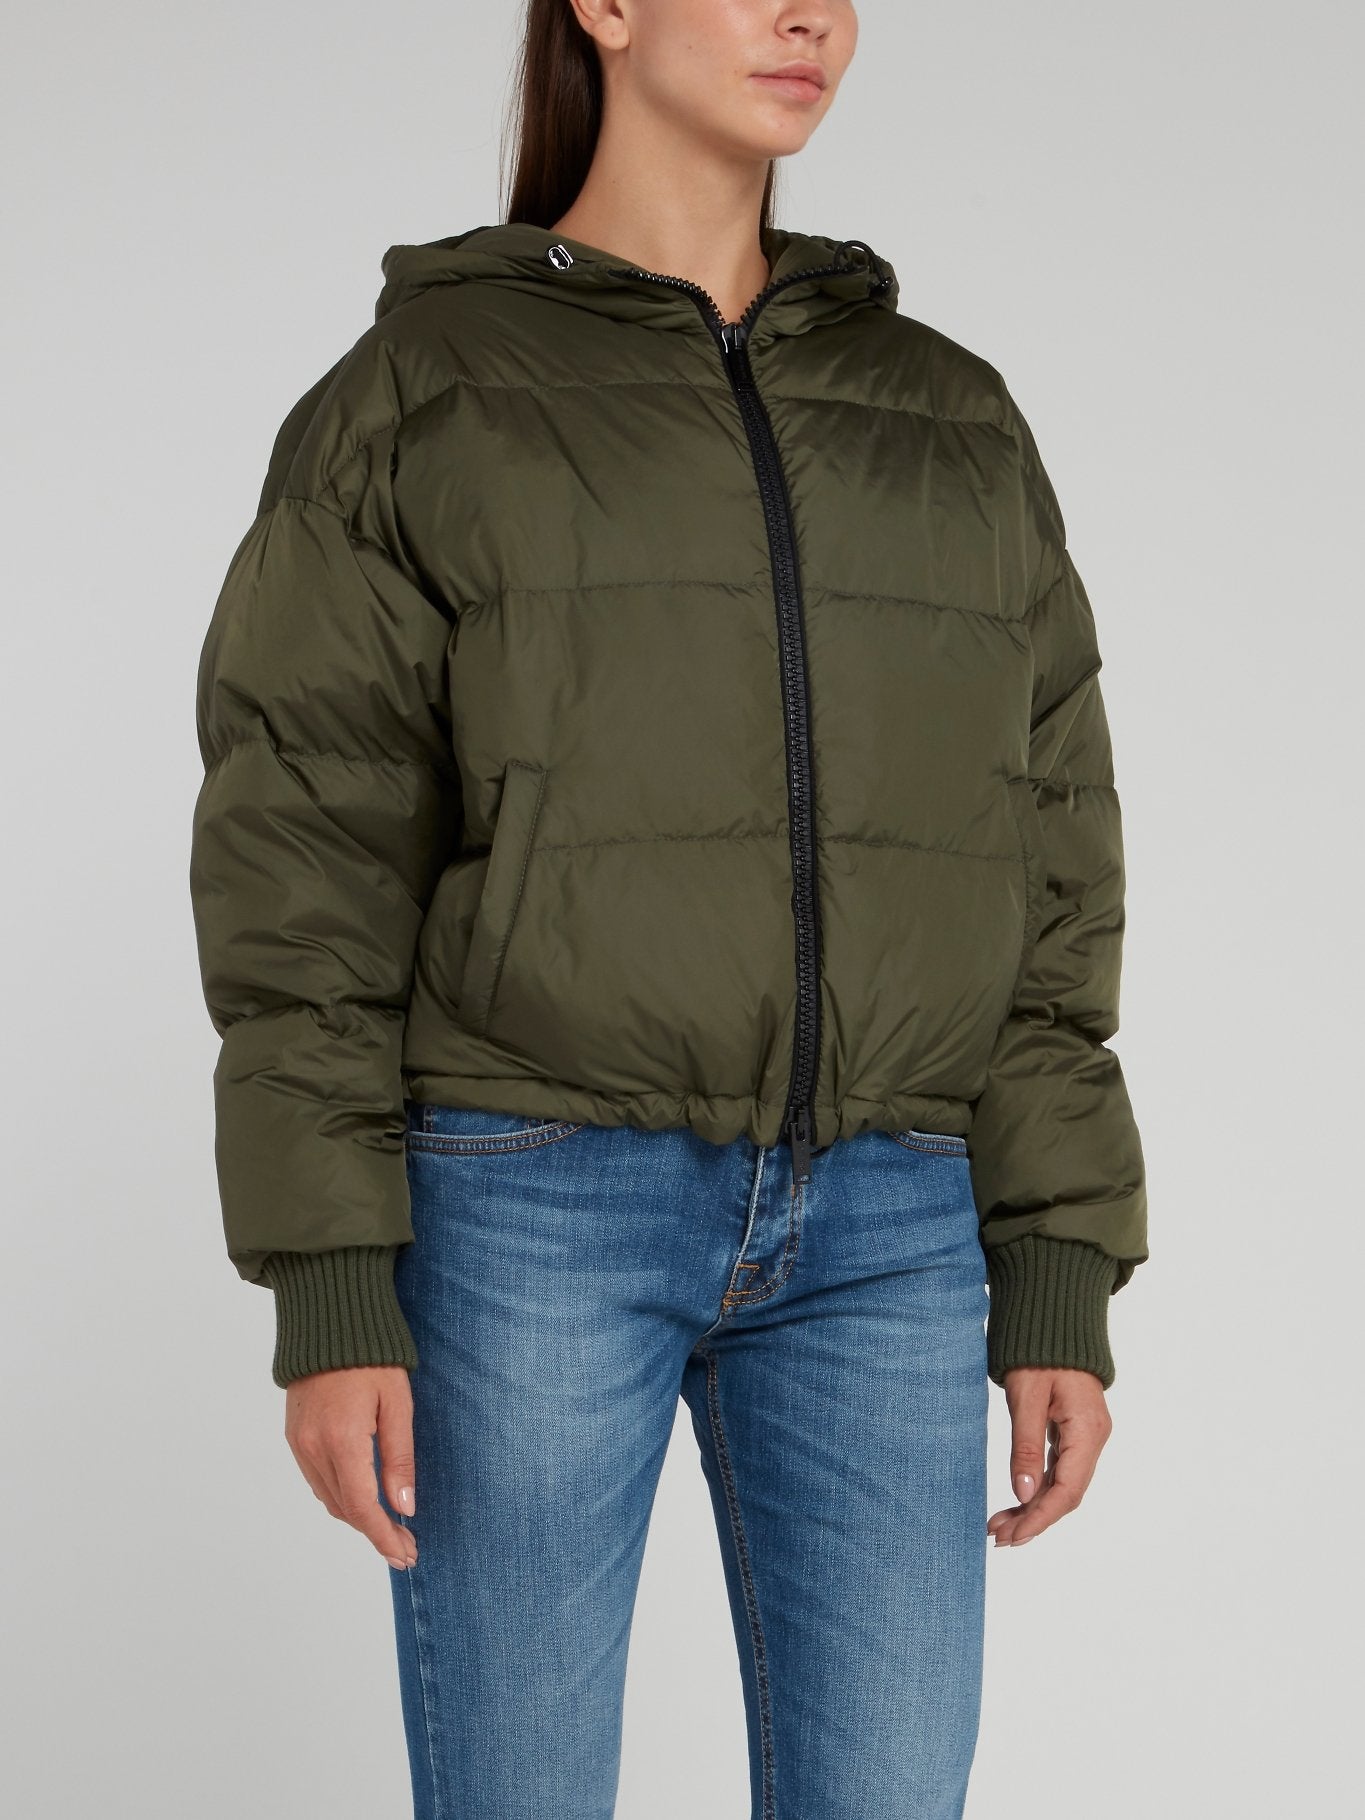 Olive Zip Up Puffer Jacket